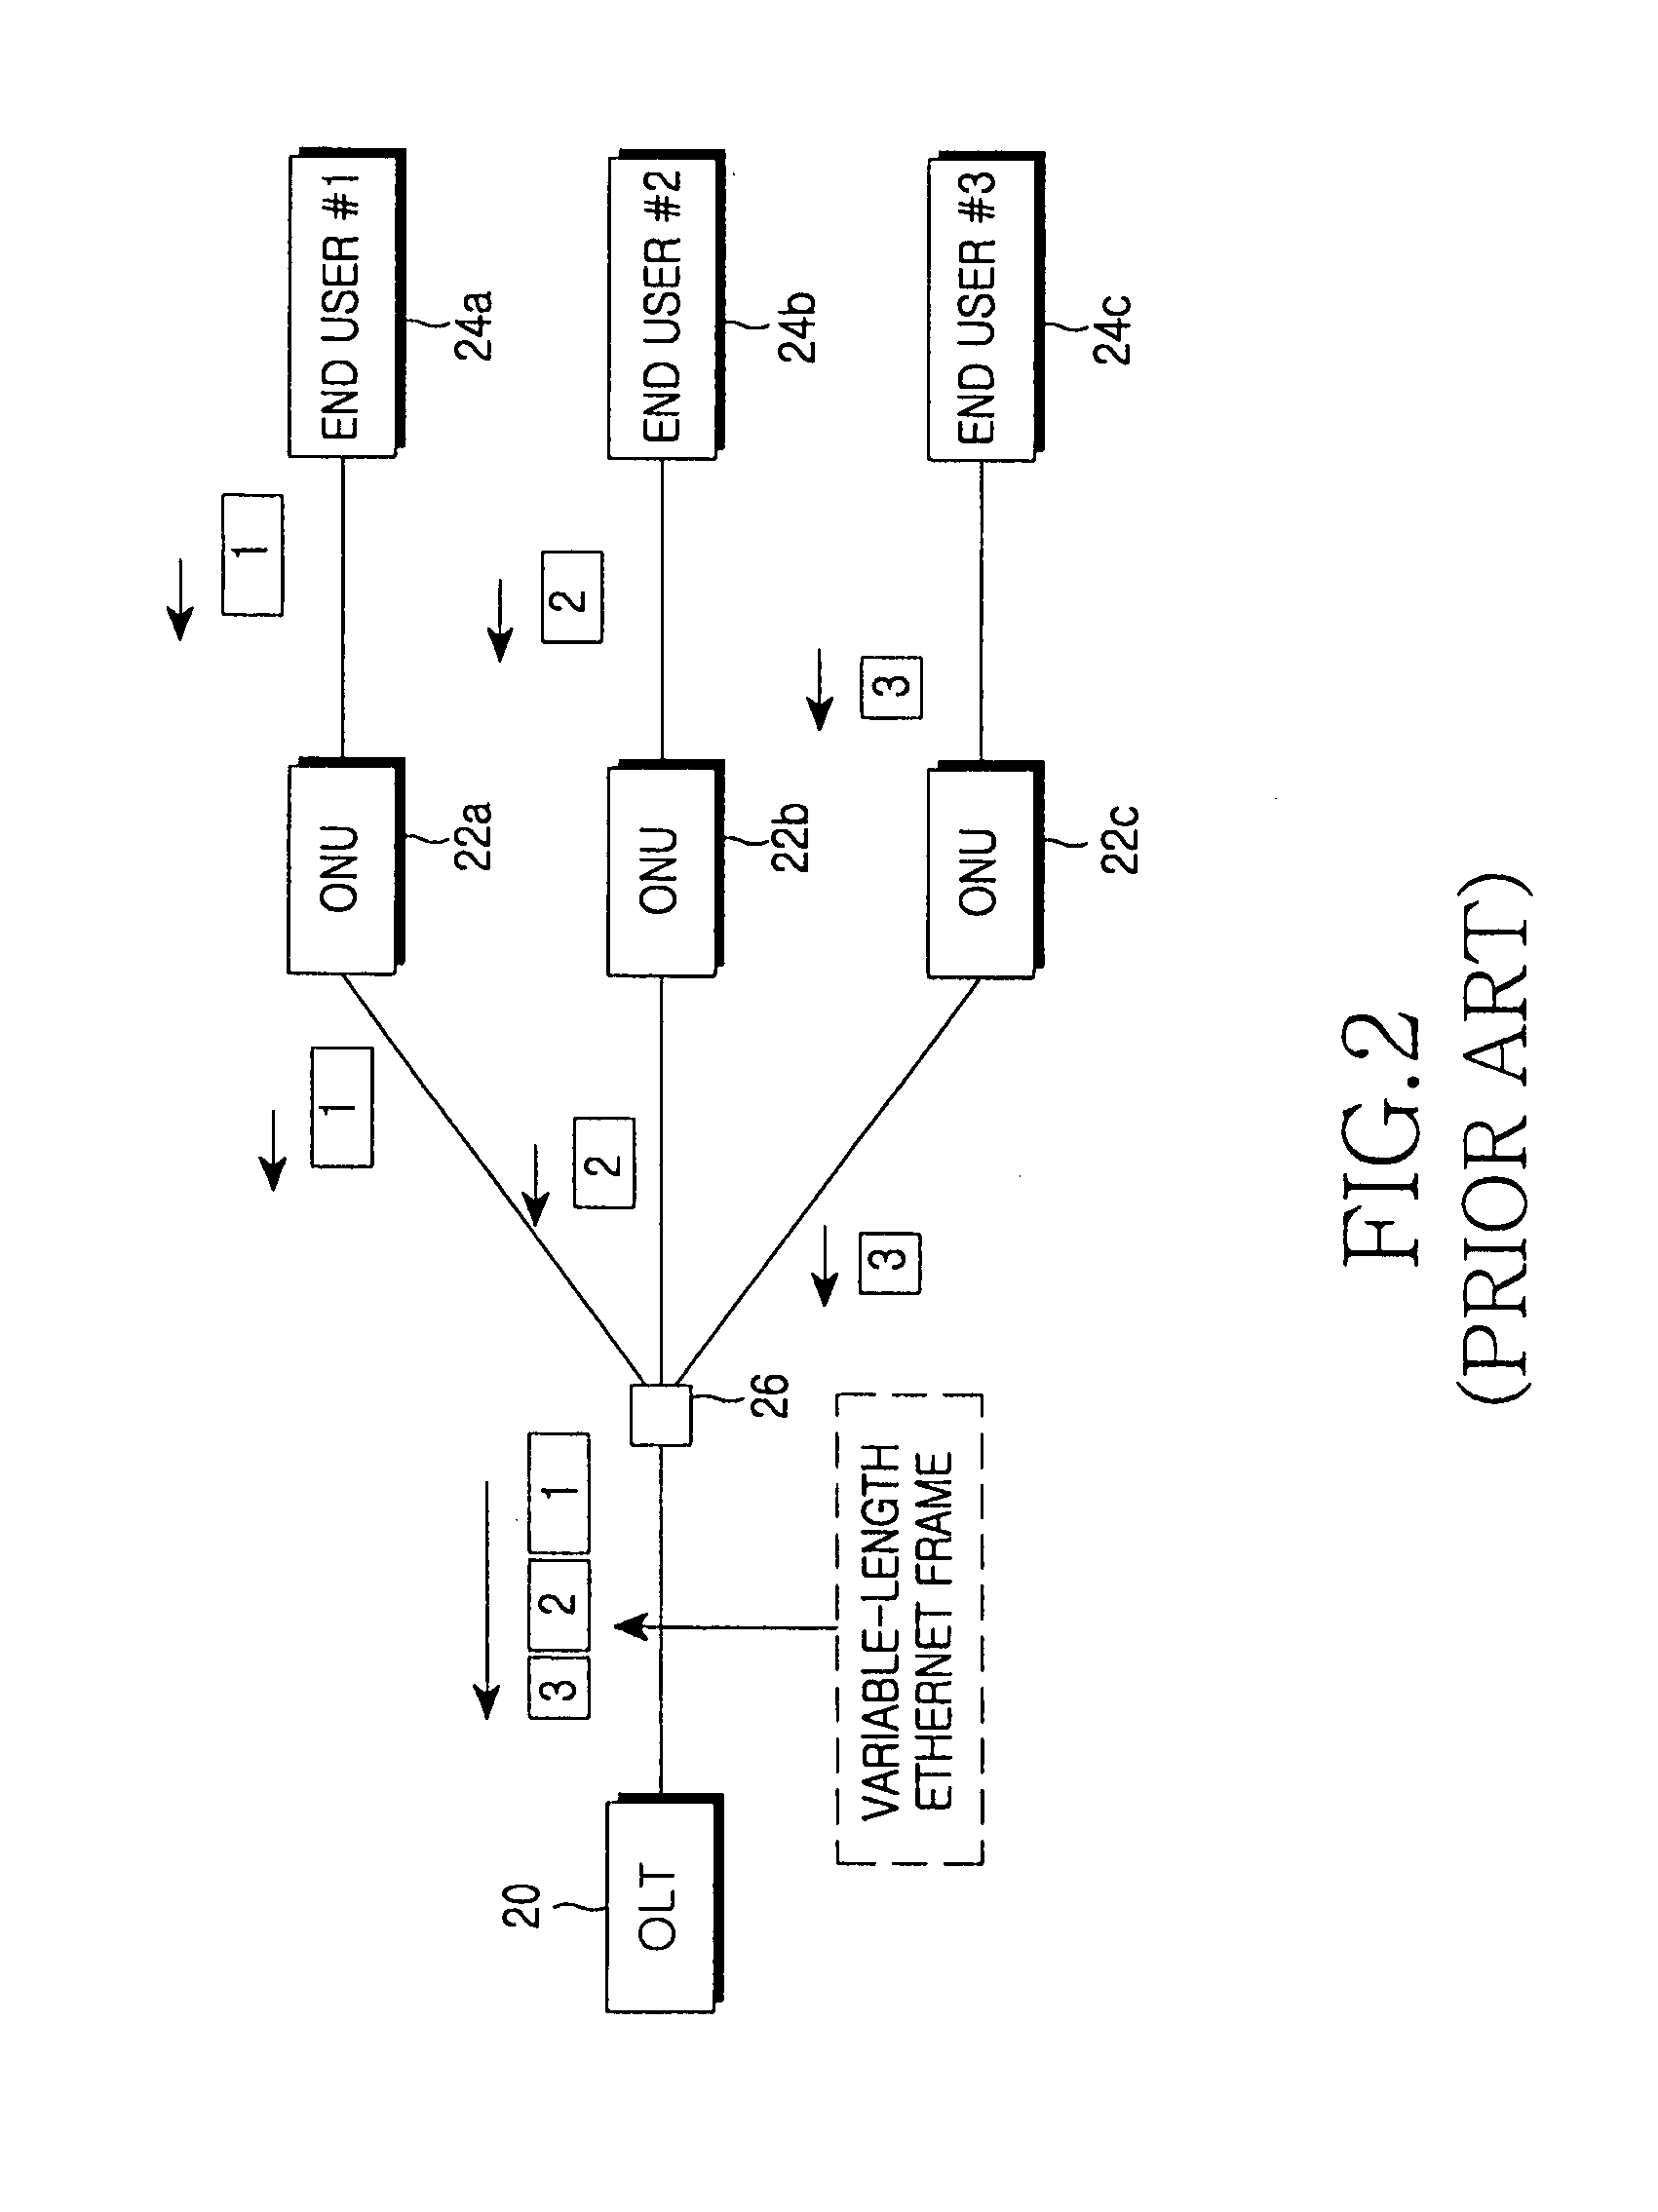 Method for allocating bandwidth for voice service in a Gigabit Ethernet passive optical network